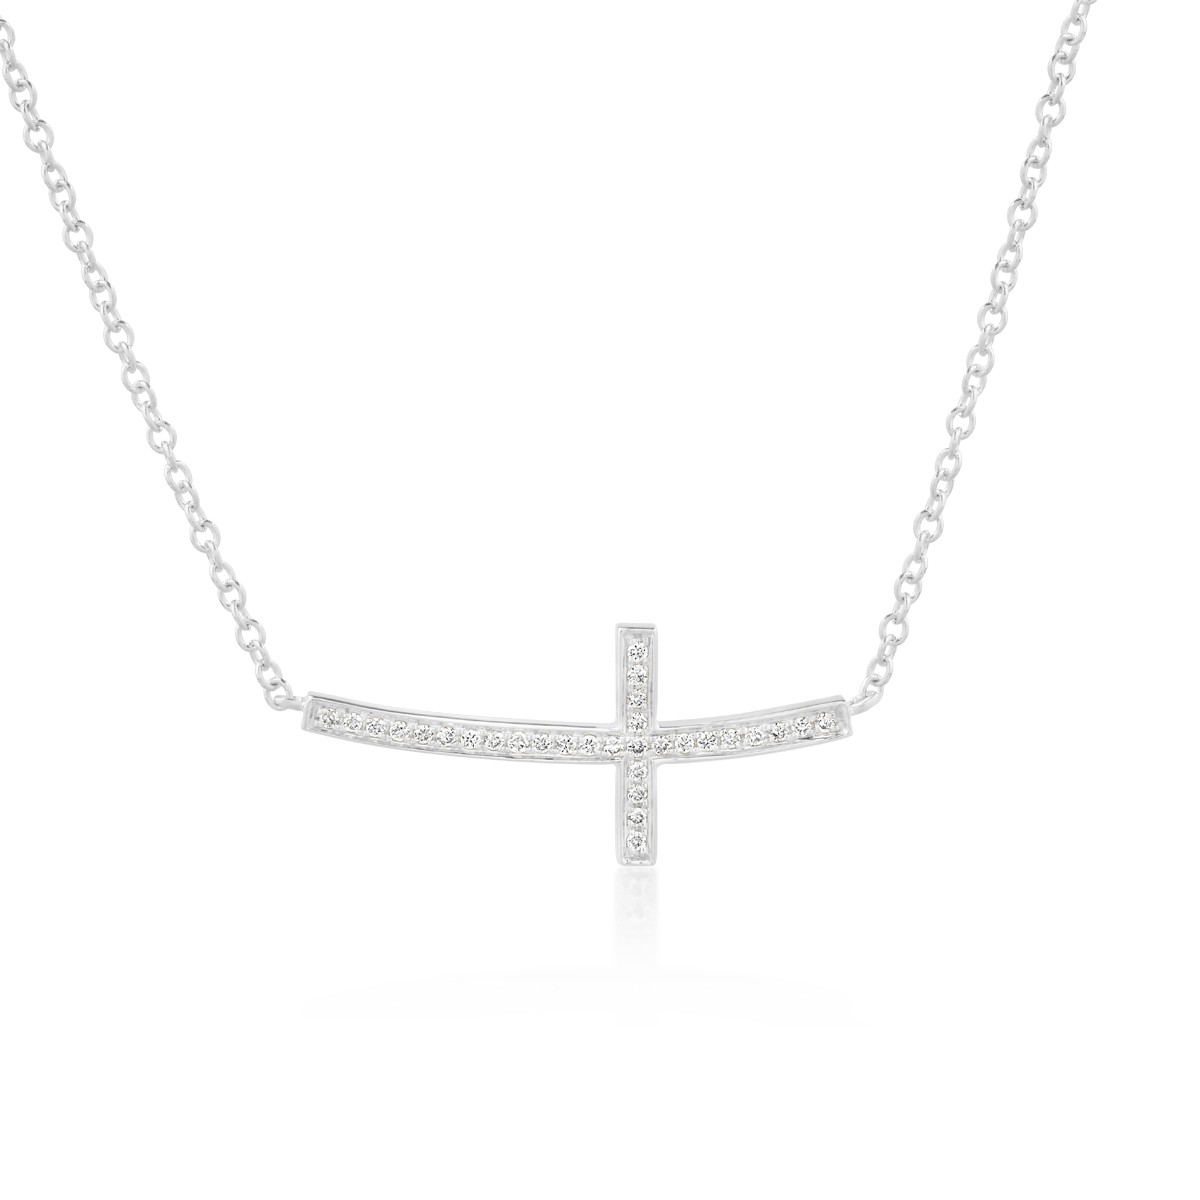 18K white gold cross pendant necklace with 0.11ct diamonds